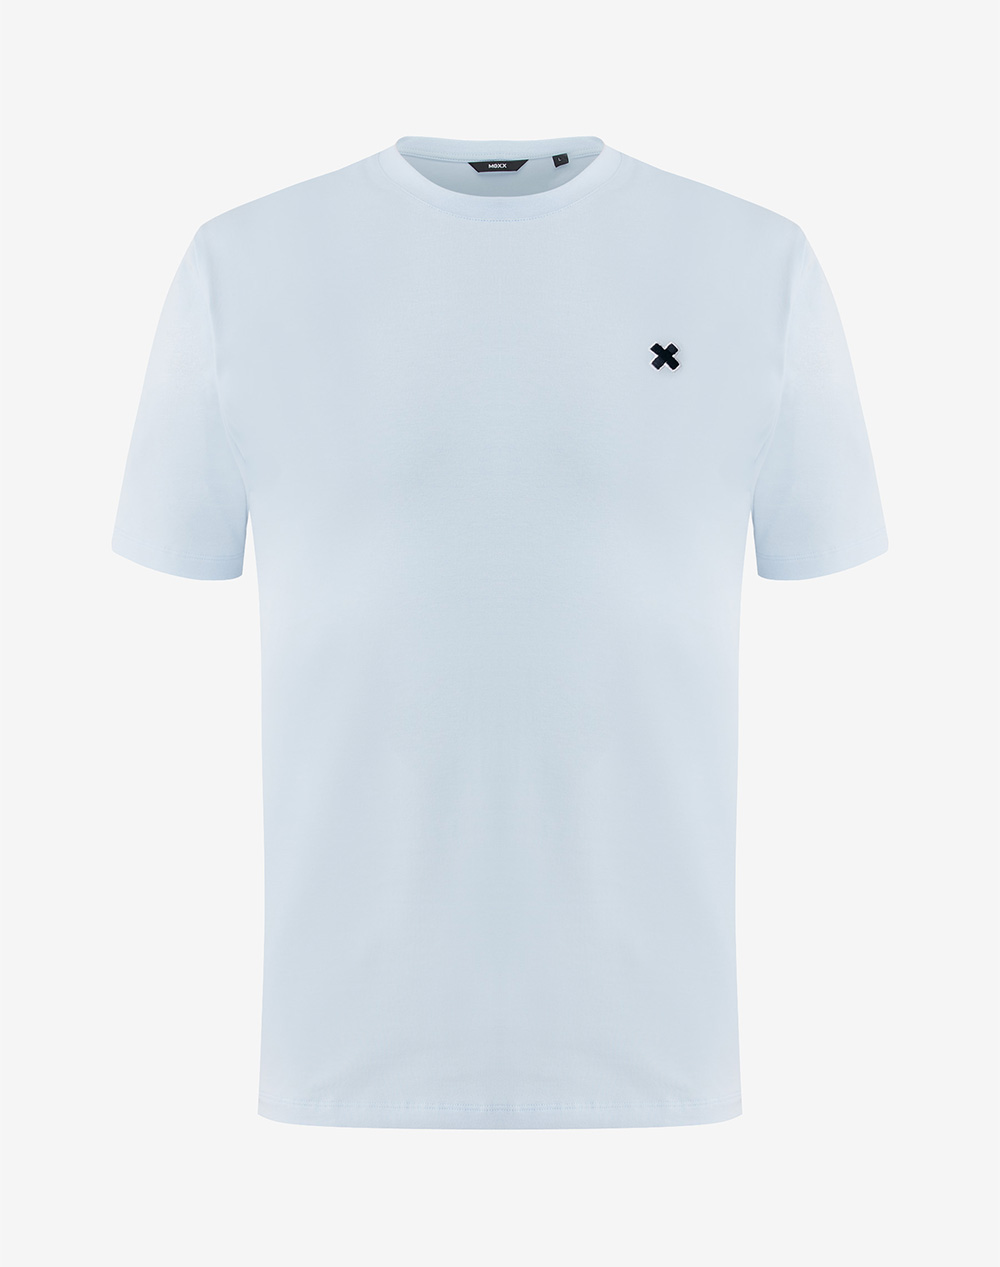 MEXX Short sleeve t-shirt with x badge